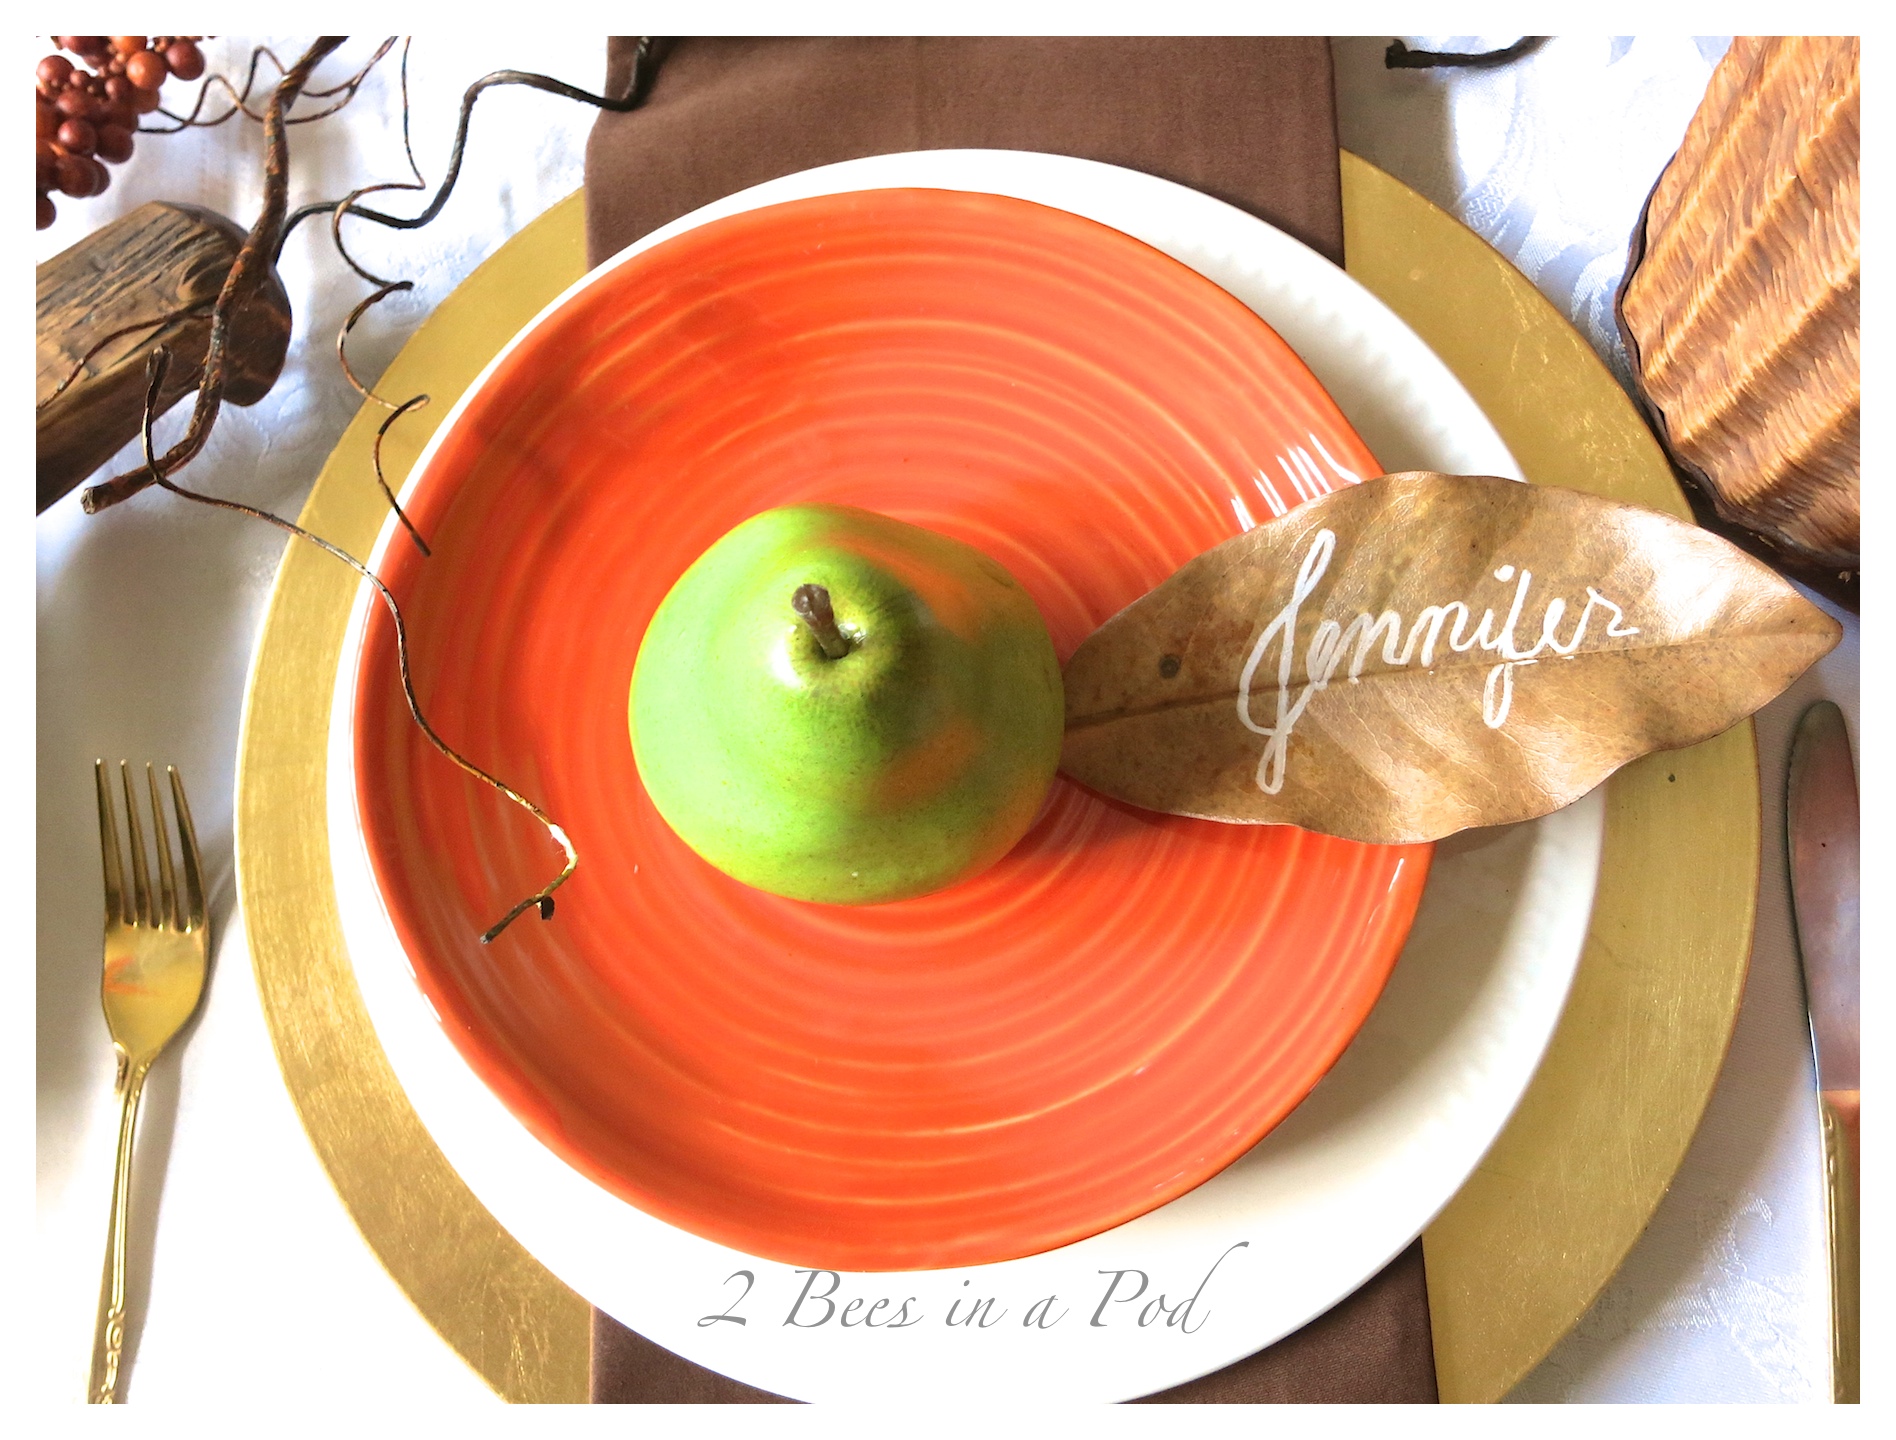 Fall tablescape using bright green pears, burnt orange, vintage and rustic elements. Also the ise of natural elements - leaves, berries, cotton and twigs. This is a Bloggers Fall Tour.